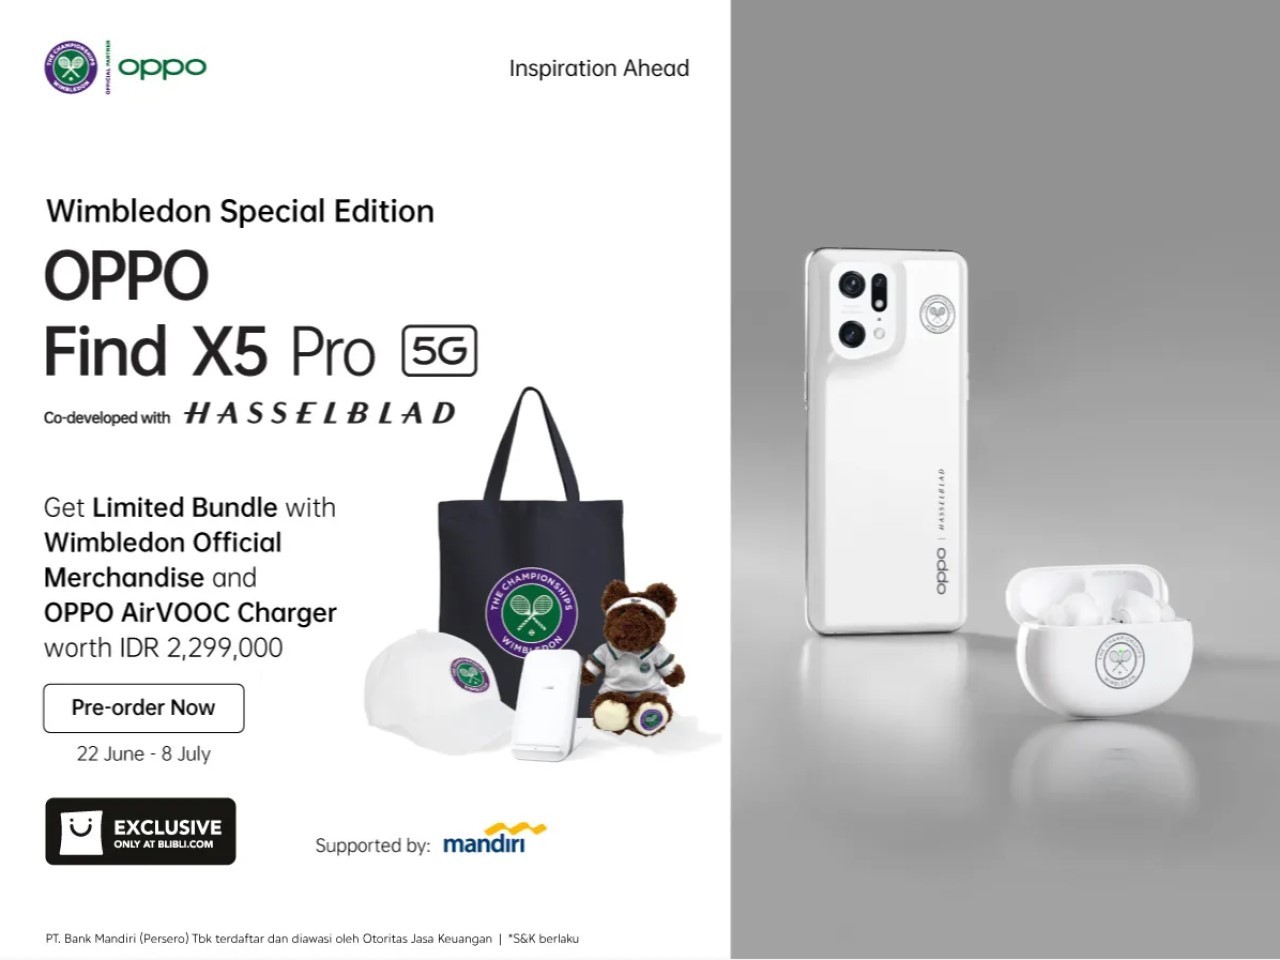 OPPO-Find-X5-Pro-5G-Wimbledon-Special-Edition-1